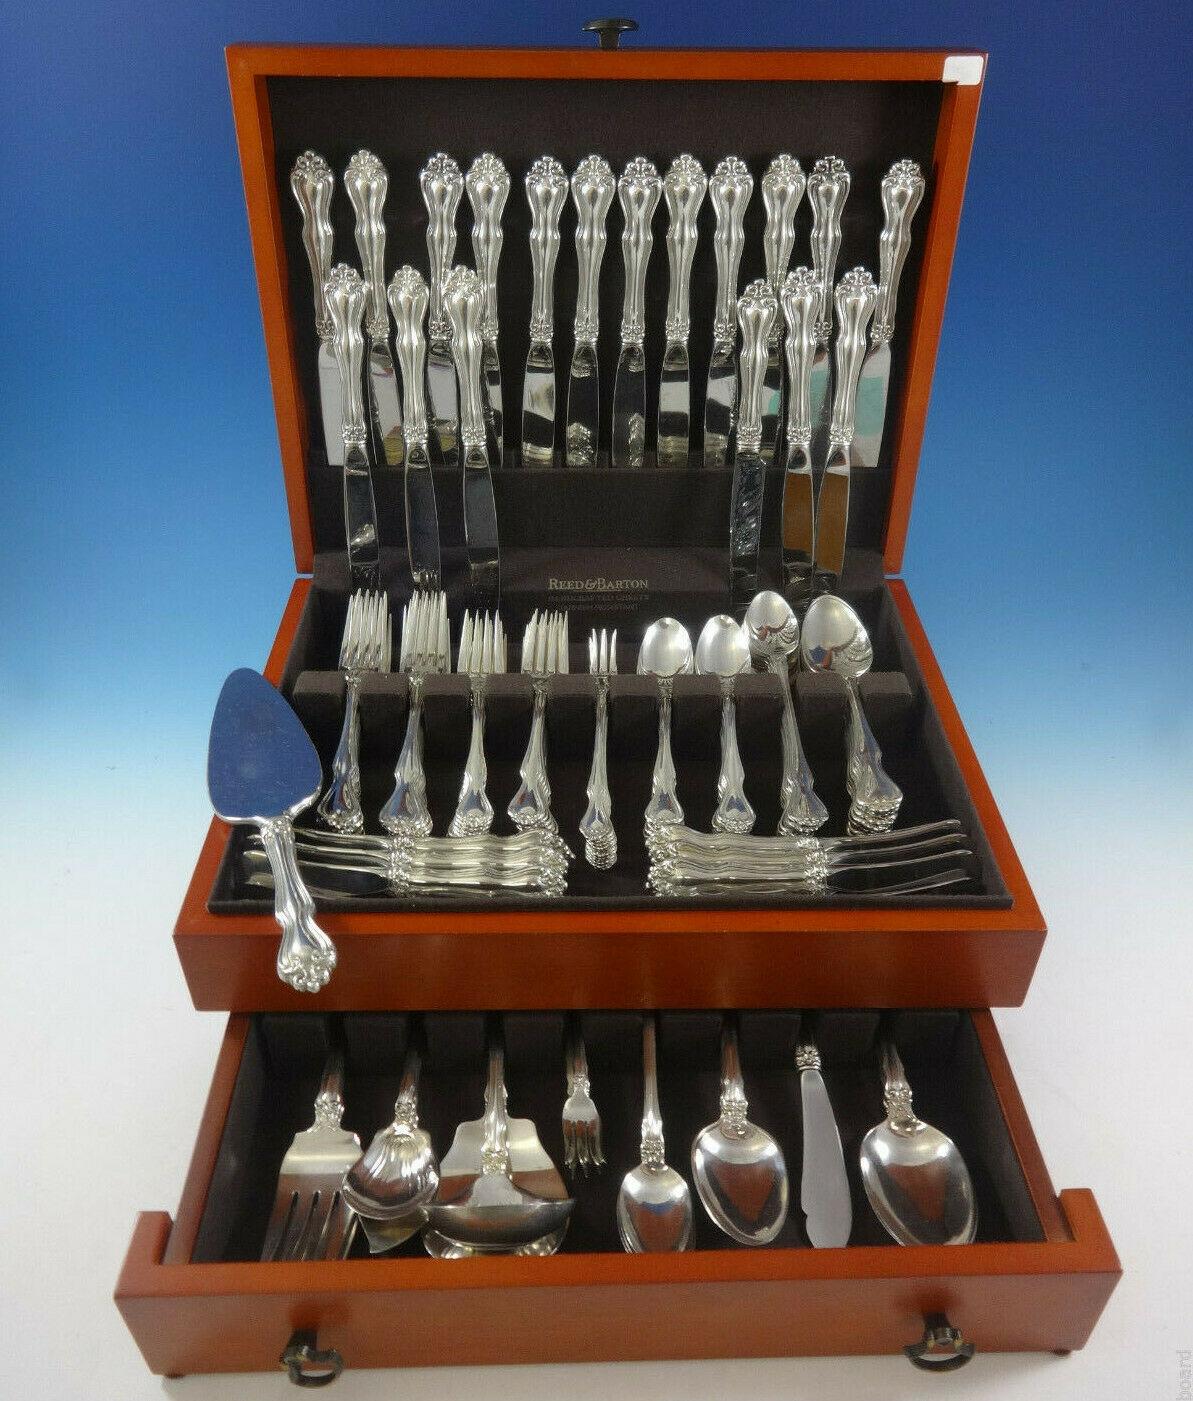 Monumental George & Martha by Westmorland sterling silver flatware set - 154 pieces. This set includes:

18 knives, 9 1/8